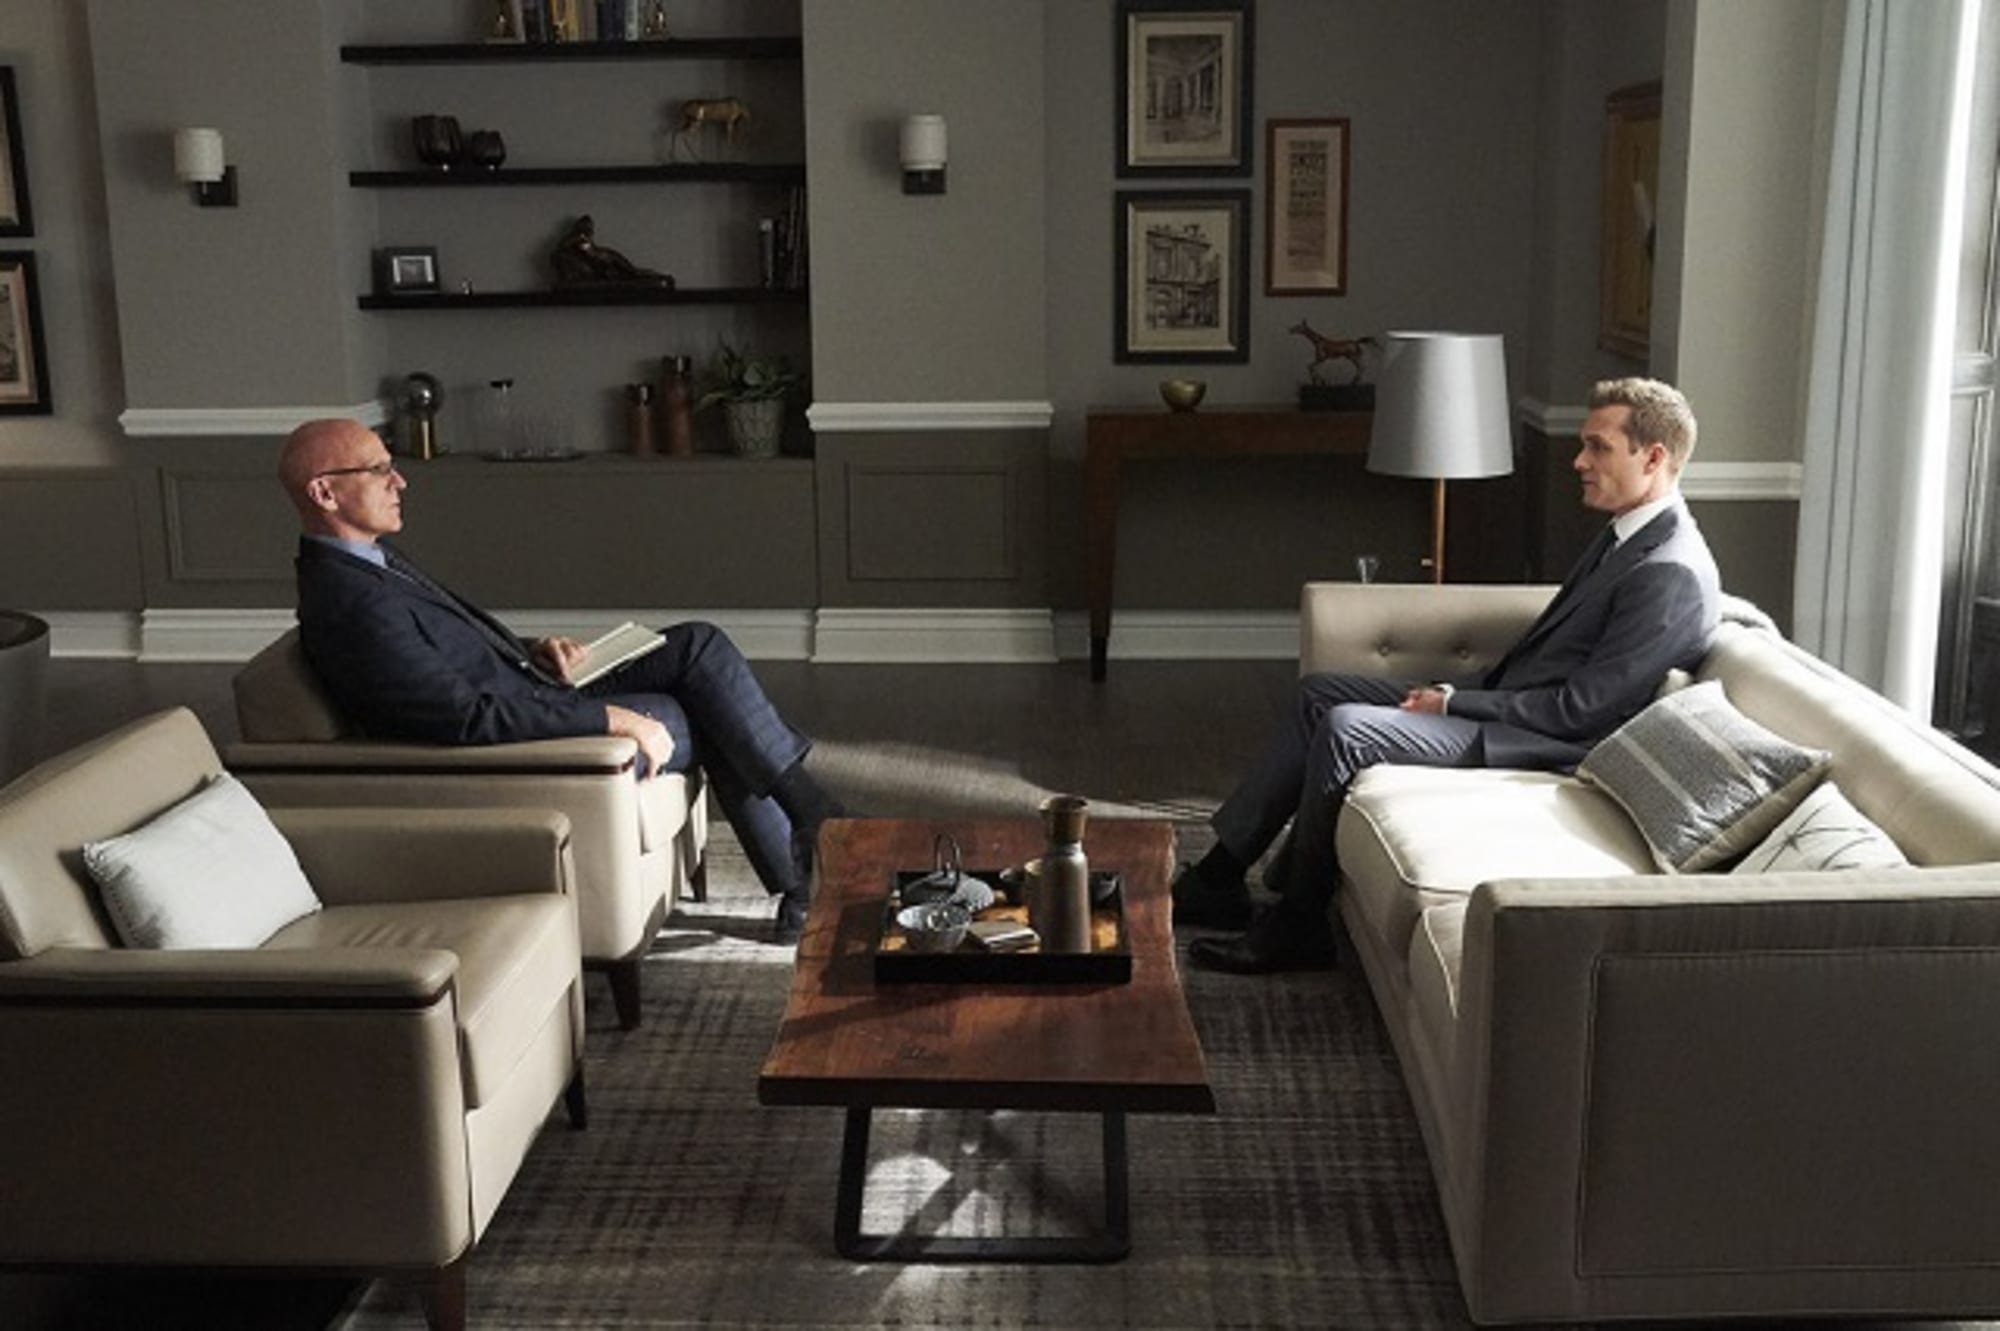 Suits season 6, episode 8 recap: Cats, Ballet, Harvey Specter and therapy